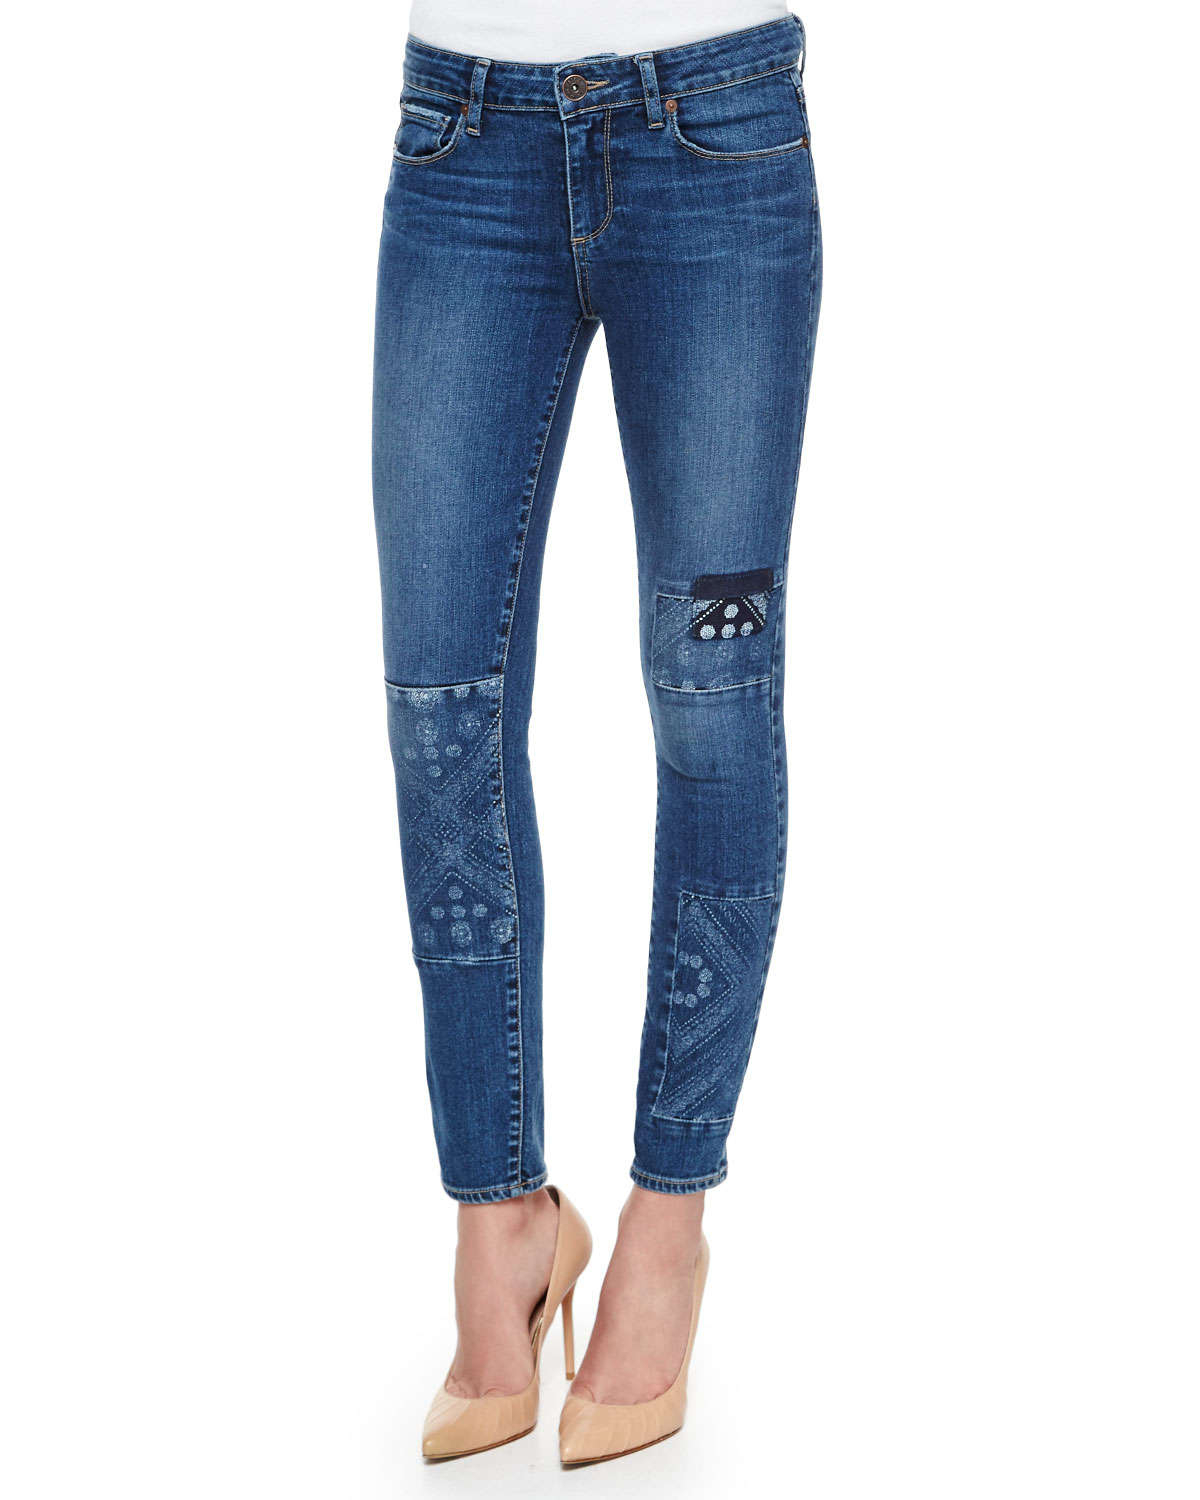 Lyst - Paige Verdugo Skinny Patchwork Jeans in Blue